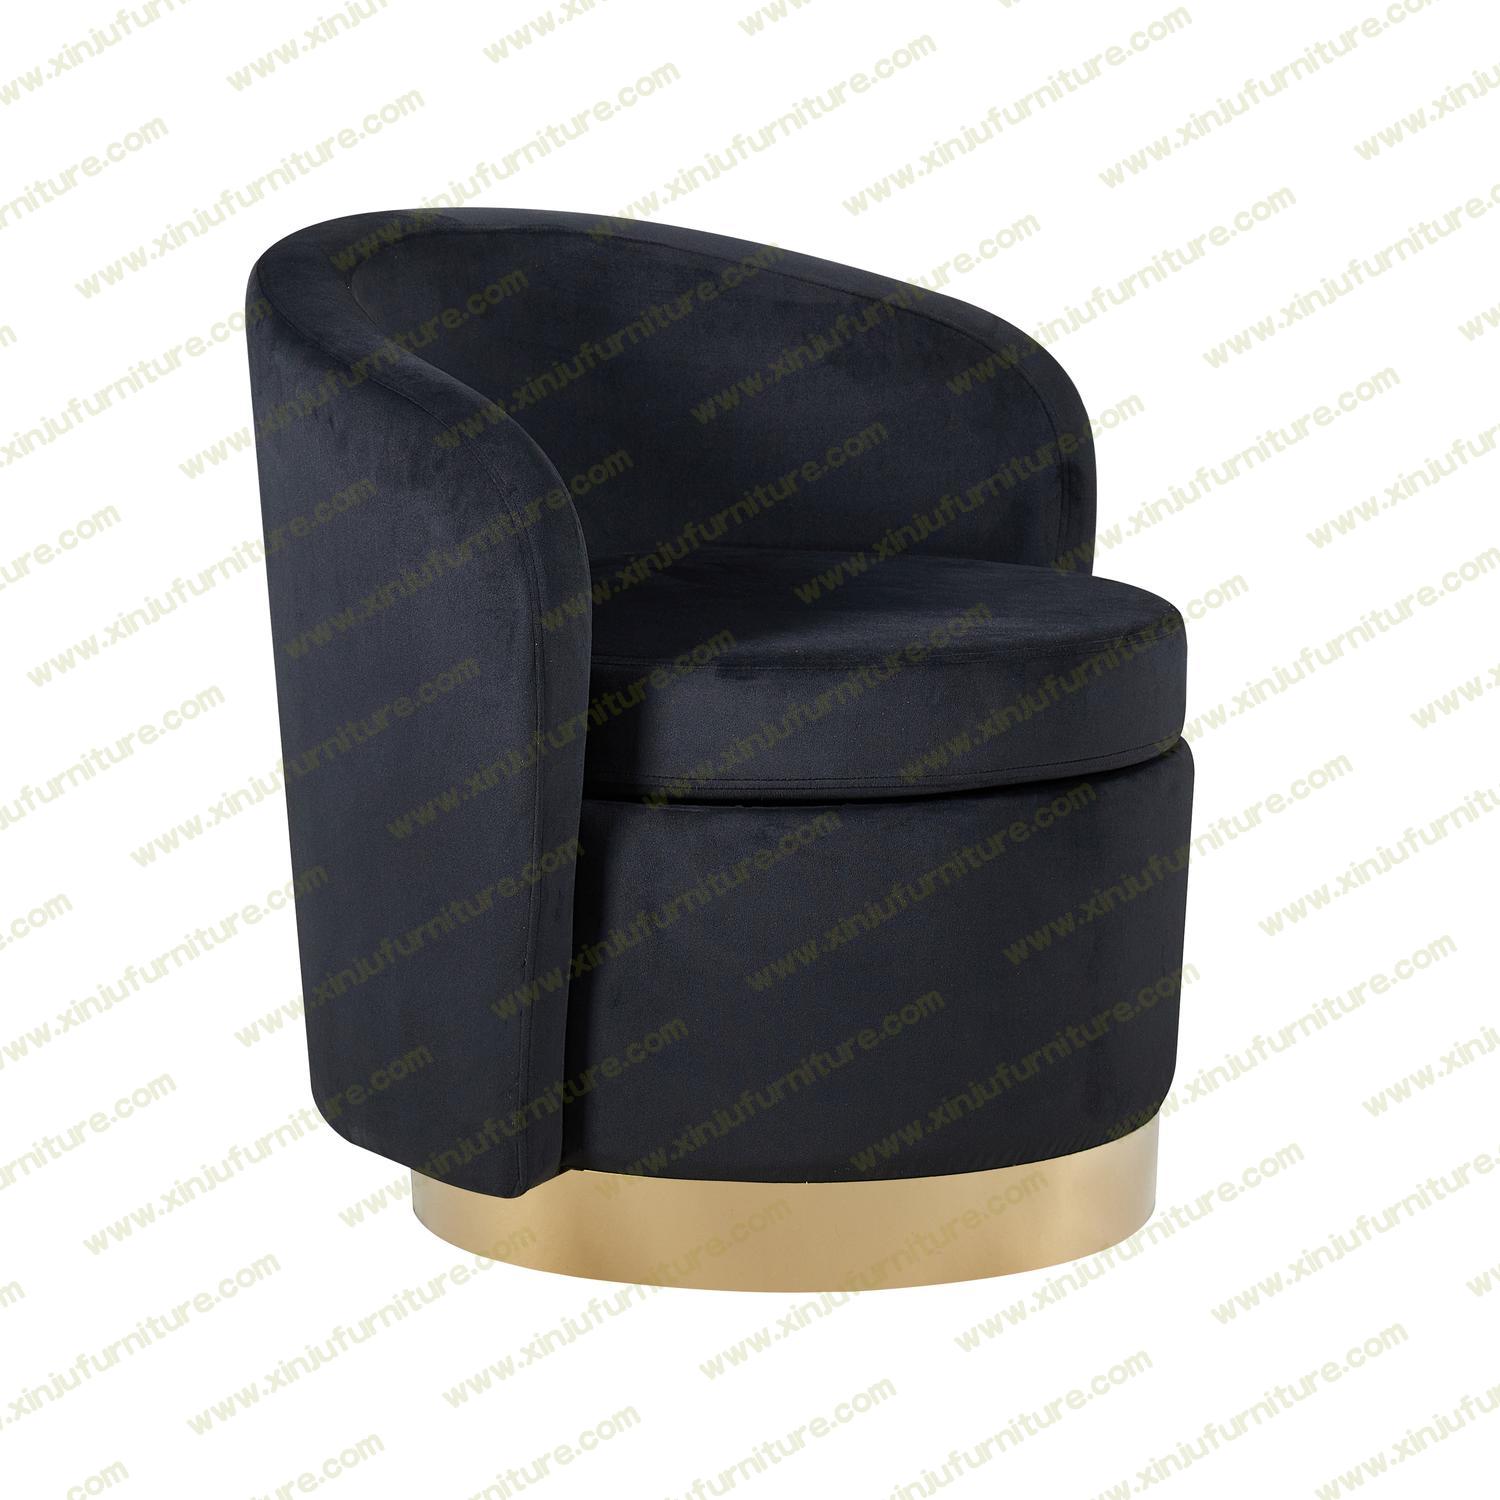 Durable and beautiful Ottoman Chair Black